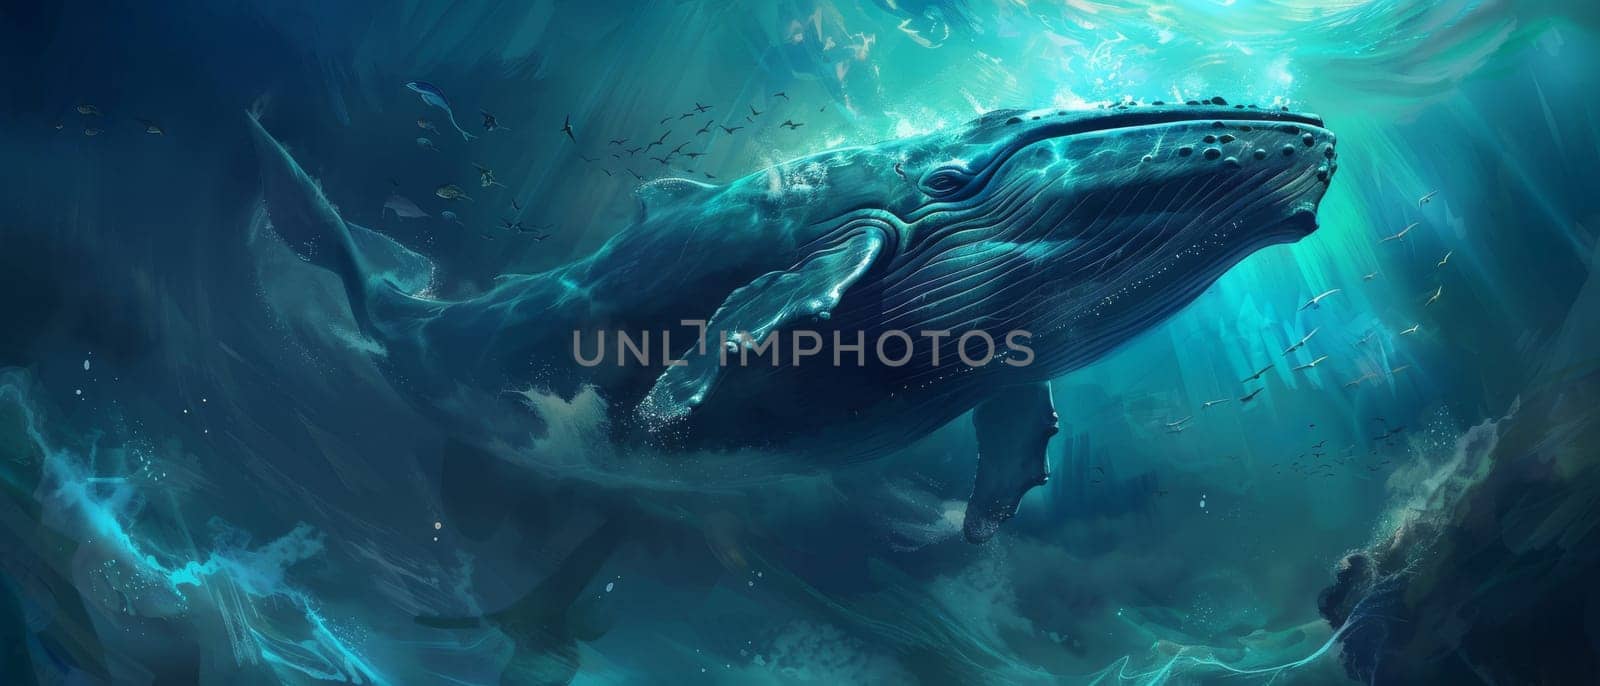 A whale is swimming in the ocean by AI generated image.